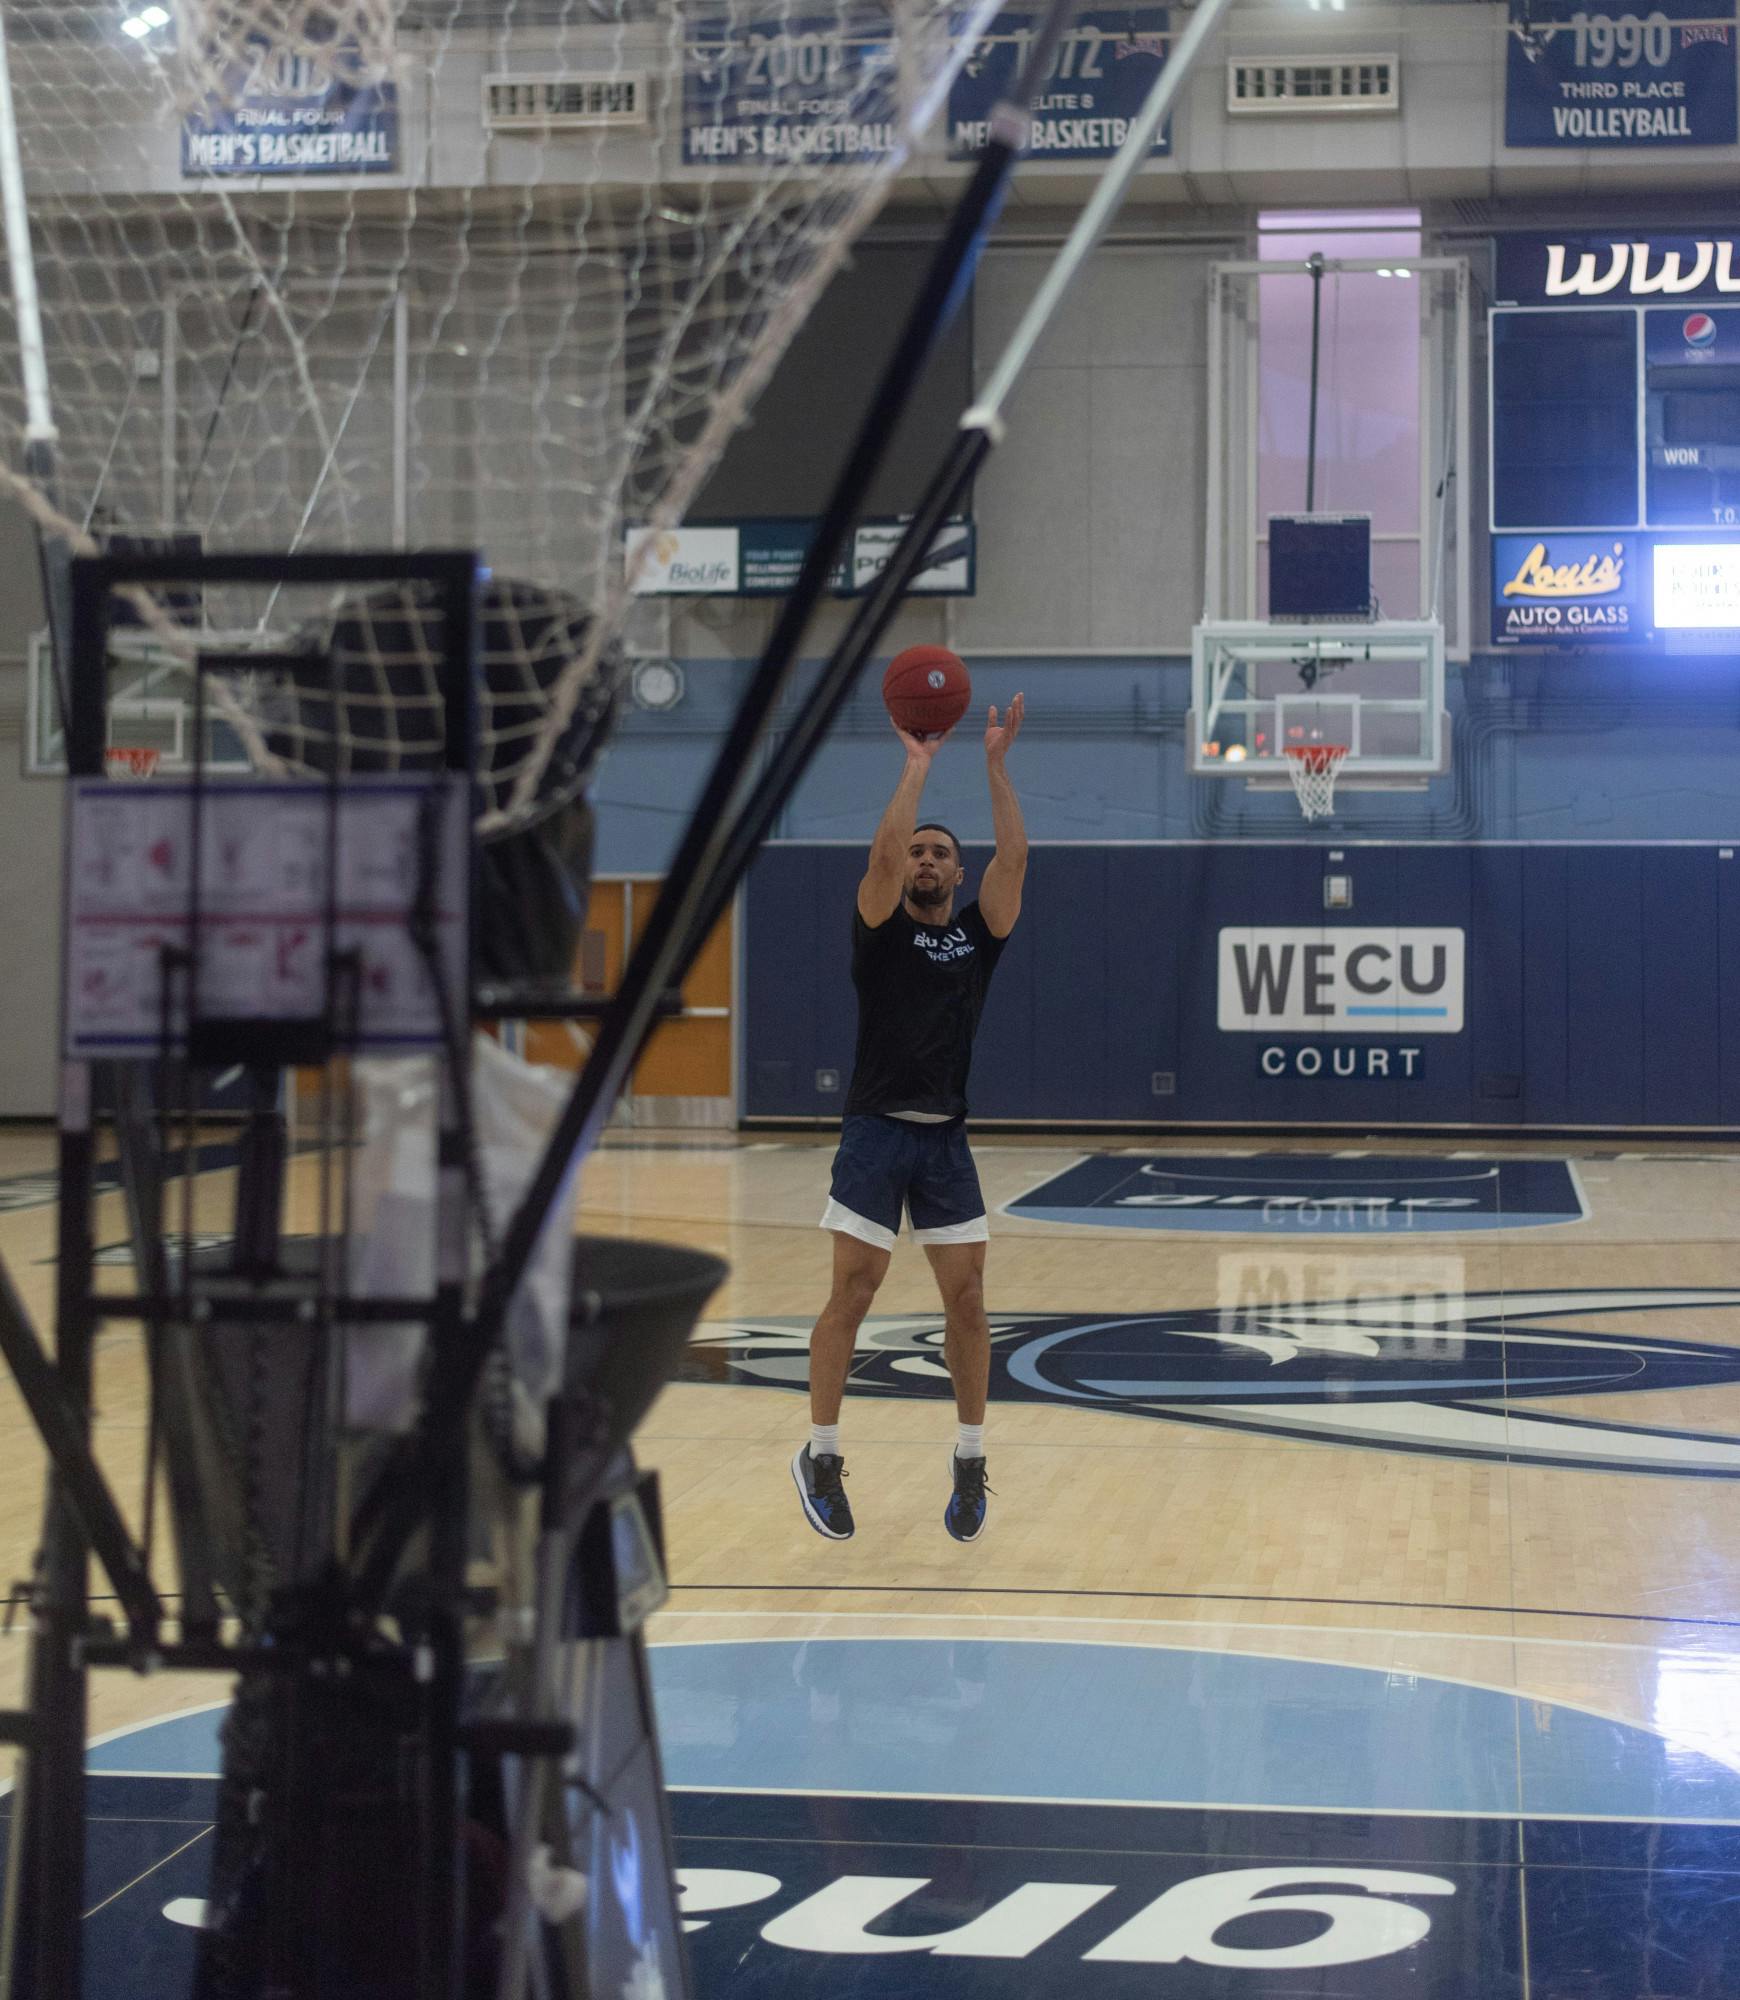 day in the life of a wwu athlete (SECOND IMAGE)